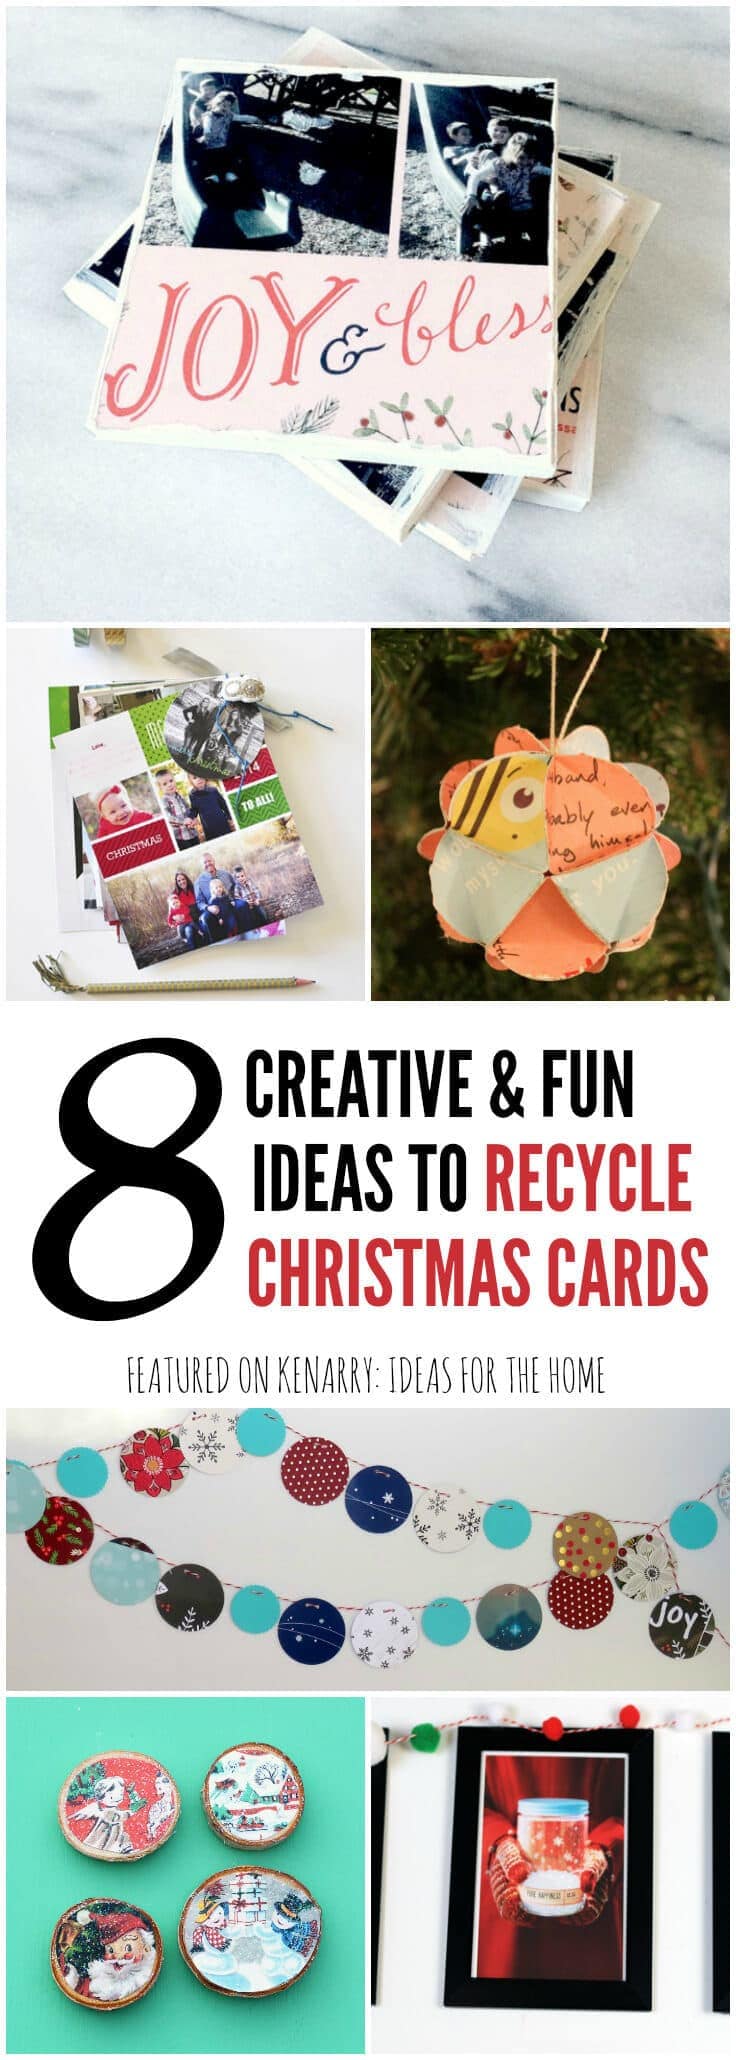 What fun ways to recycle Christmas cards to use for crafts and decor! Use any of these 8 ideas to upcycle your holiday cards and continue to enjoy them long after the season is over.